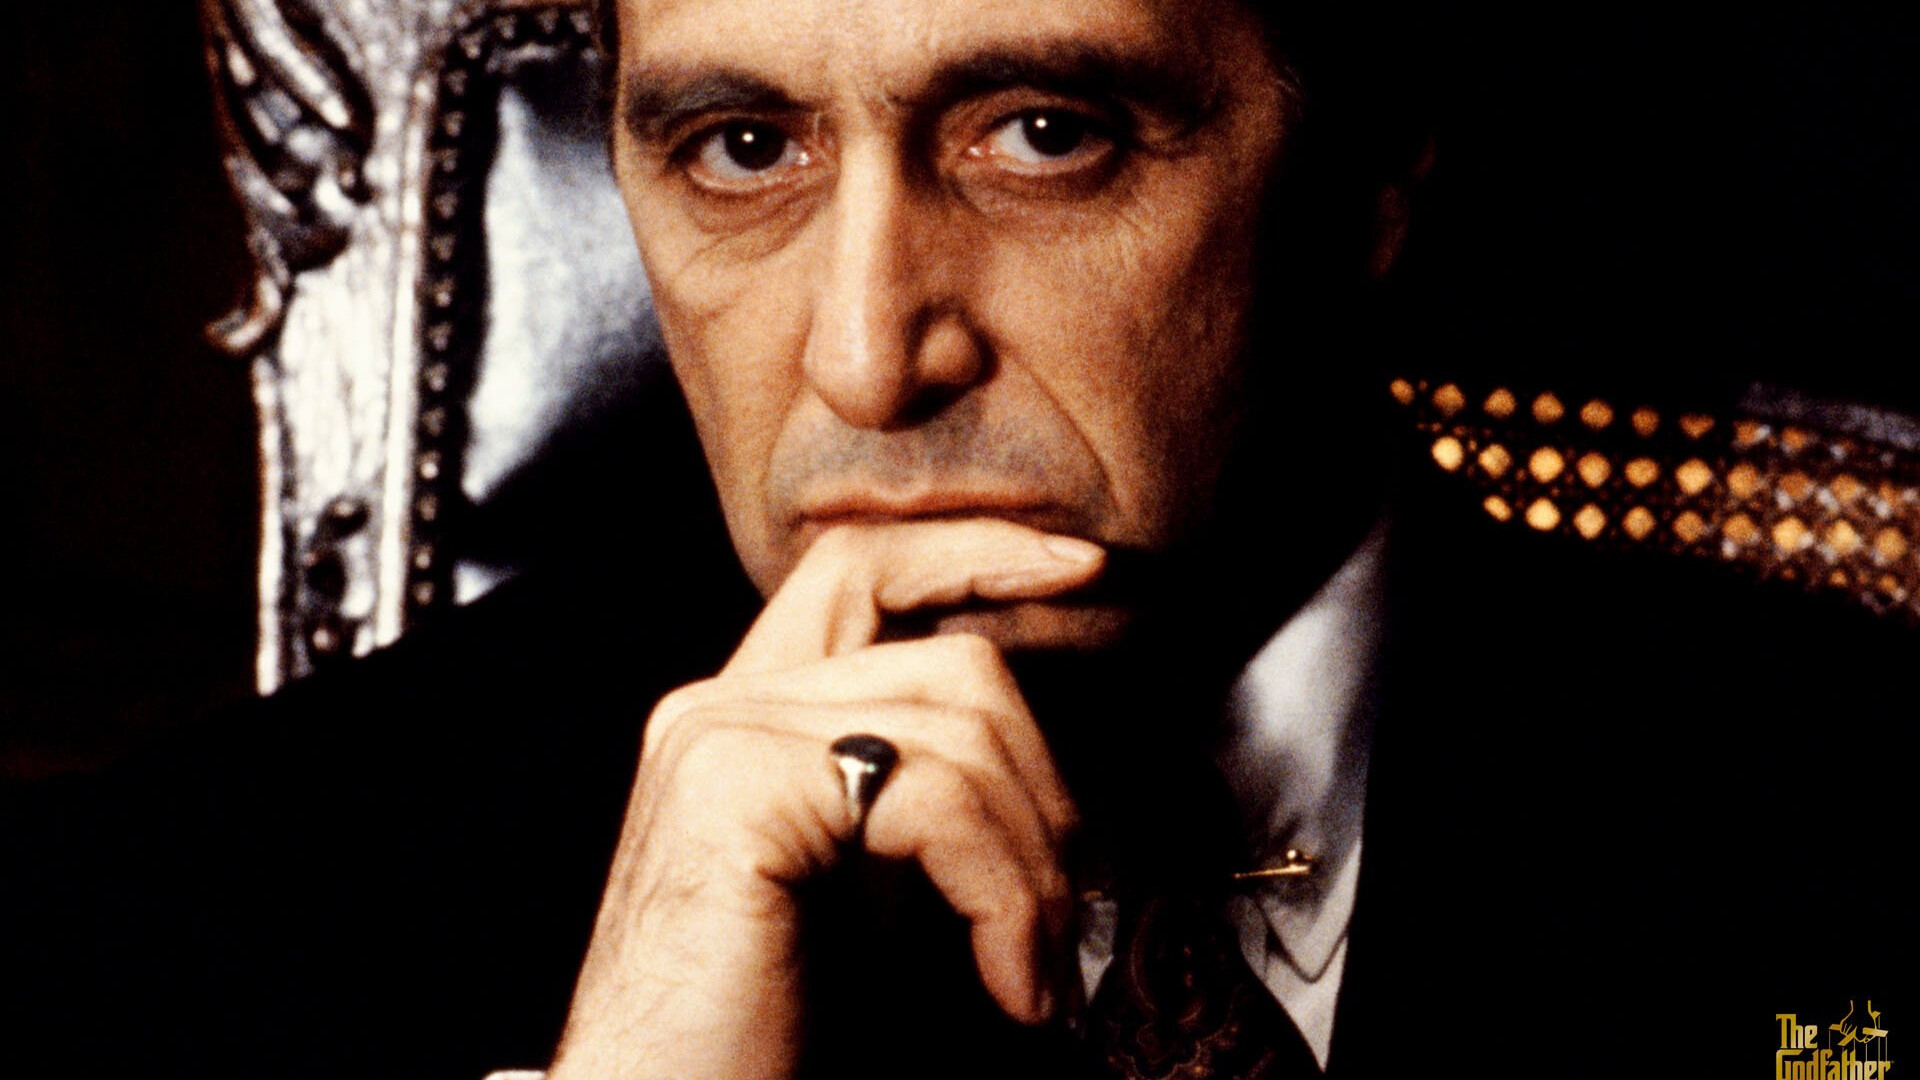 The Godfather: A 1990 American crime film produced and directed by Francis Ford Coppola, Al Pacino. 1920x1080 Full HD Background.